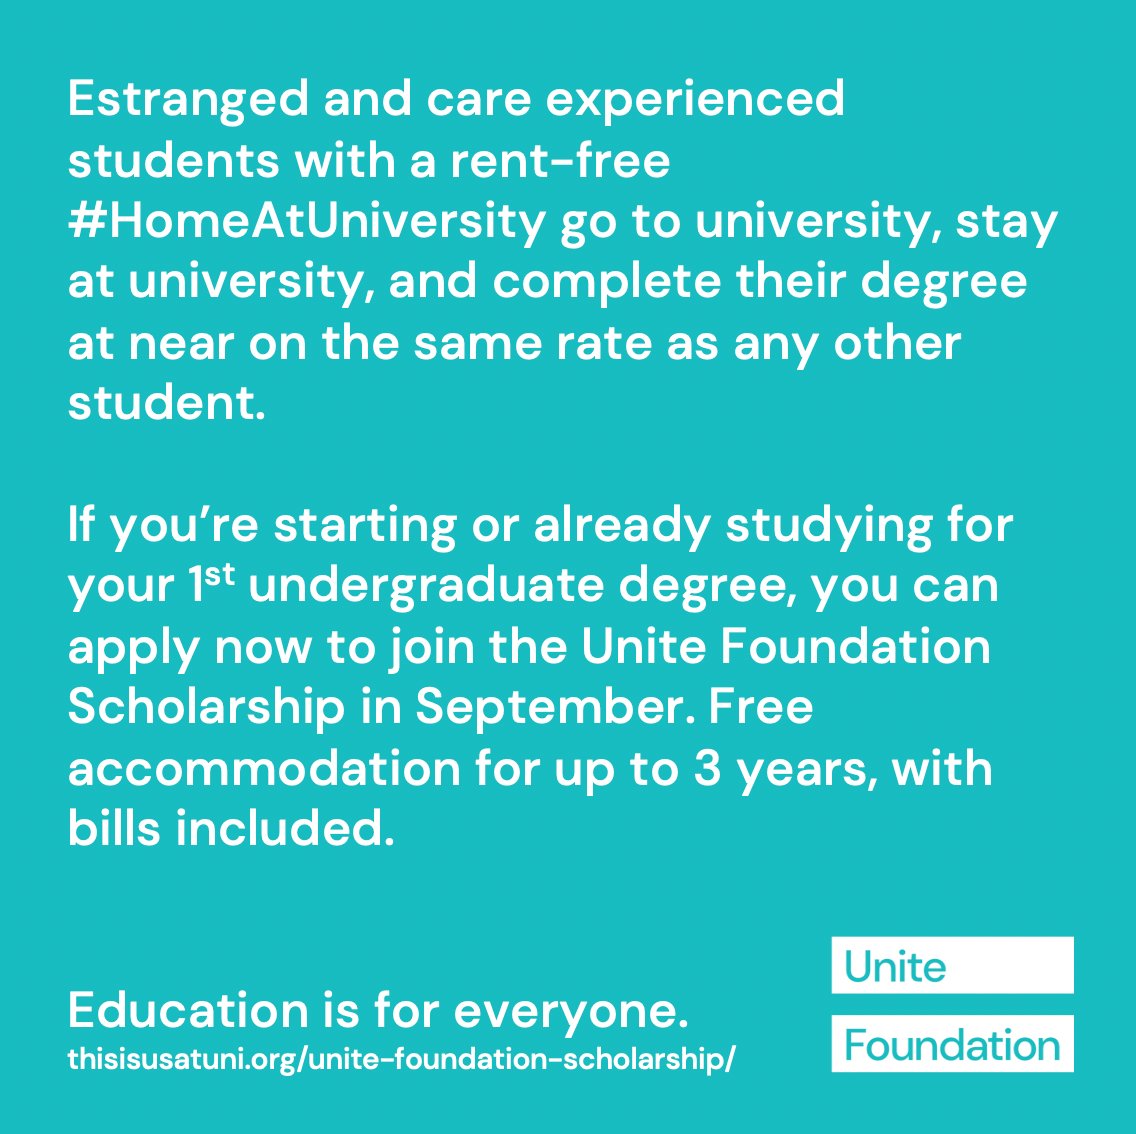 Tony is right, attainment is one piece of the puzzle. Estranged and care experienced students with a rent-free #HomeAtUniversity stay at uni, complete their courses & achieve 2:1 & 1st class honours degrees at near on the same rate as any other student bit.ly/JISCReport